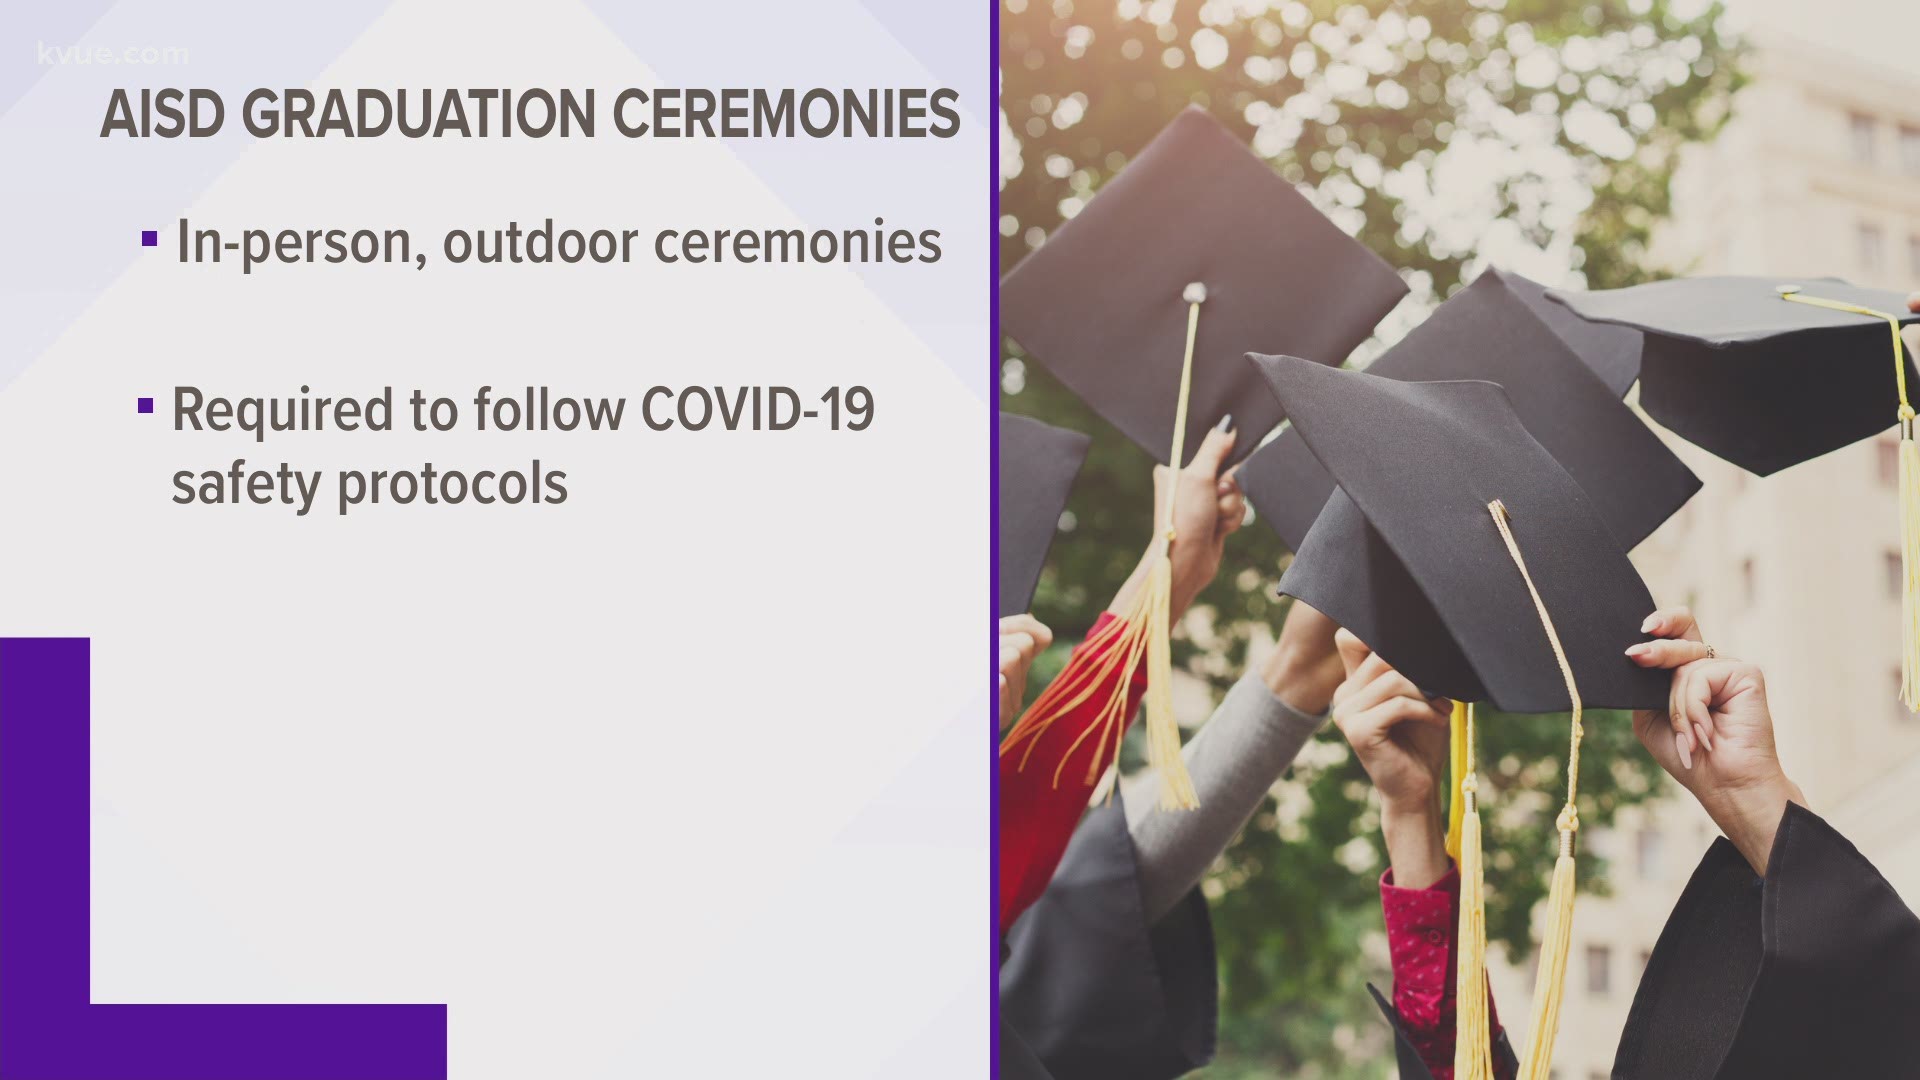 Austin ISD will hold in-person, outdoor graduation ceremonies for the Class of 2021.